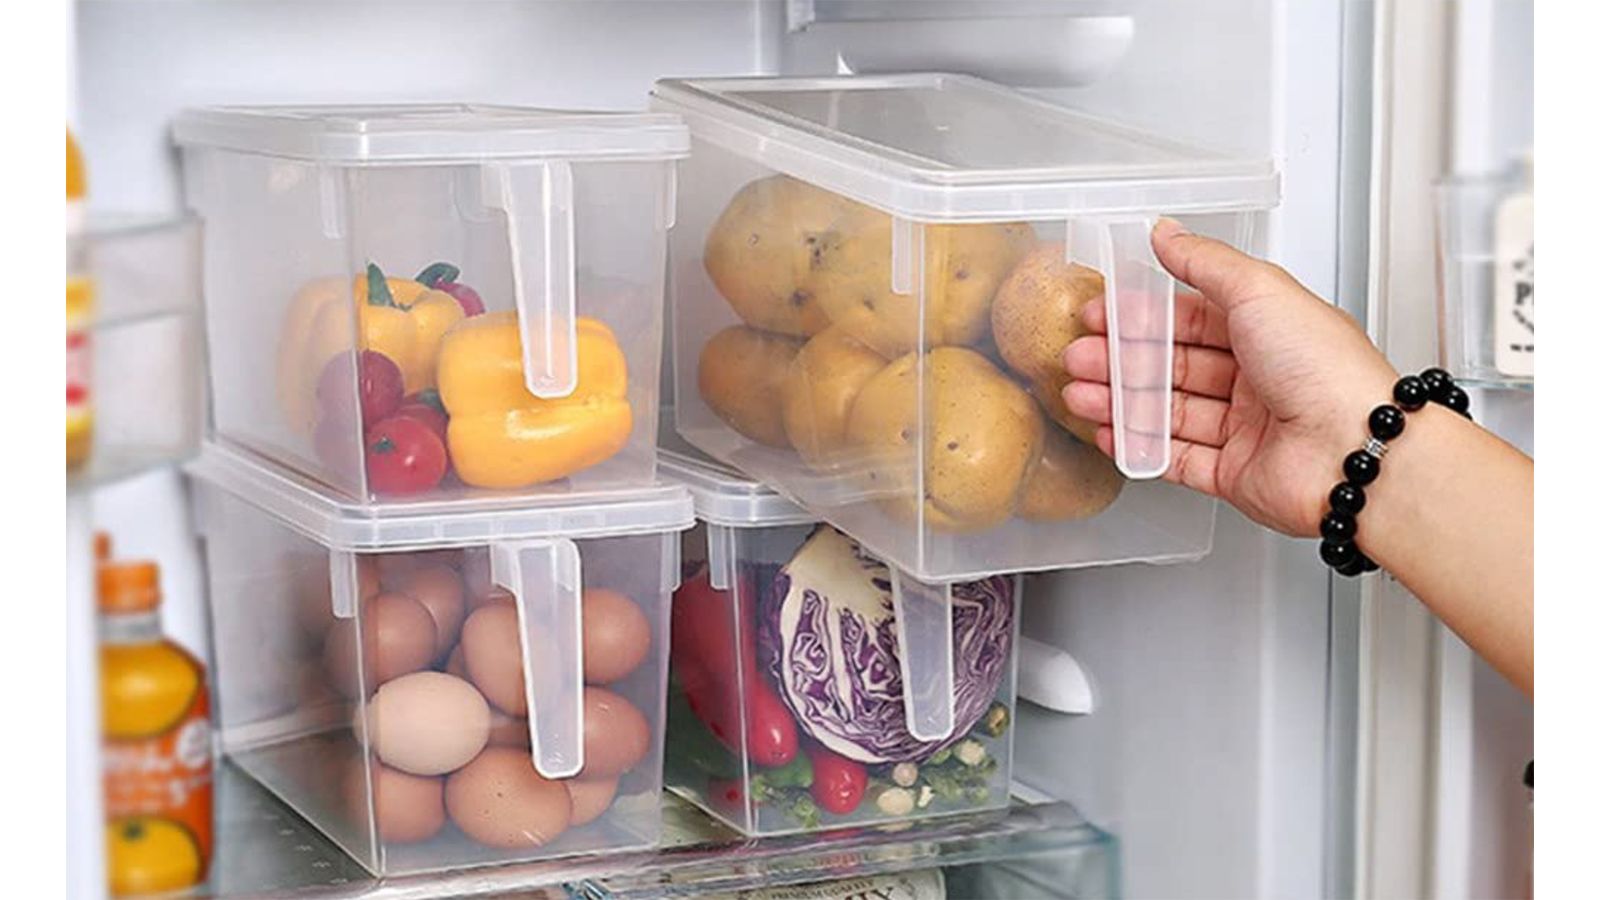 Refrigerator Organization Ideas for Better Function and Storage